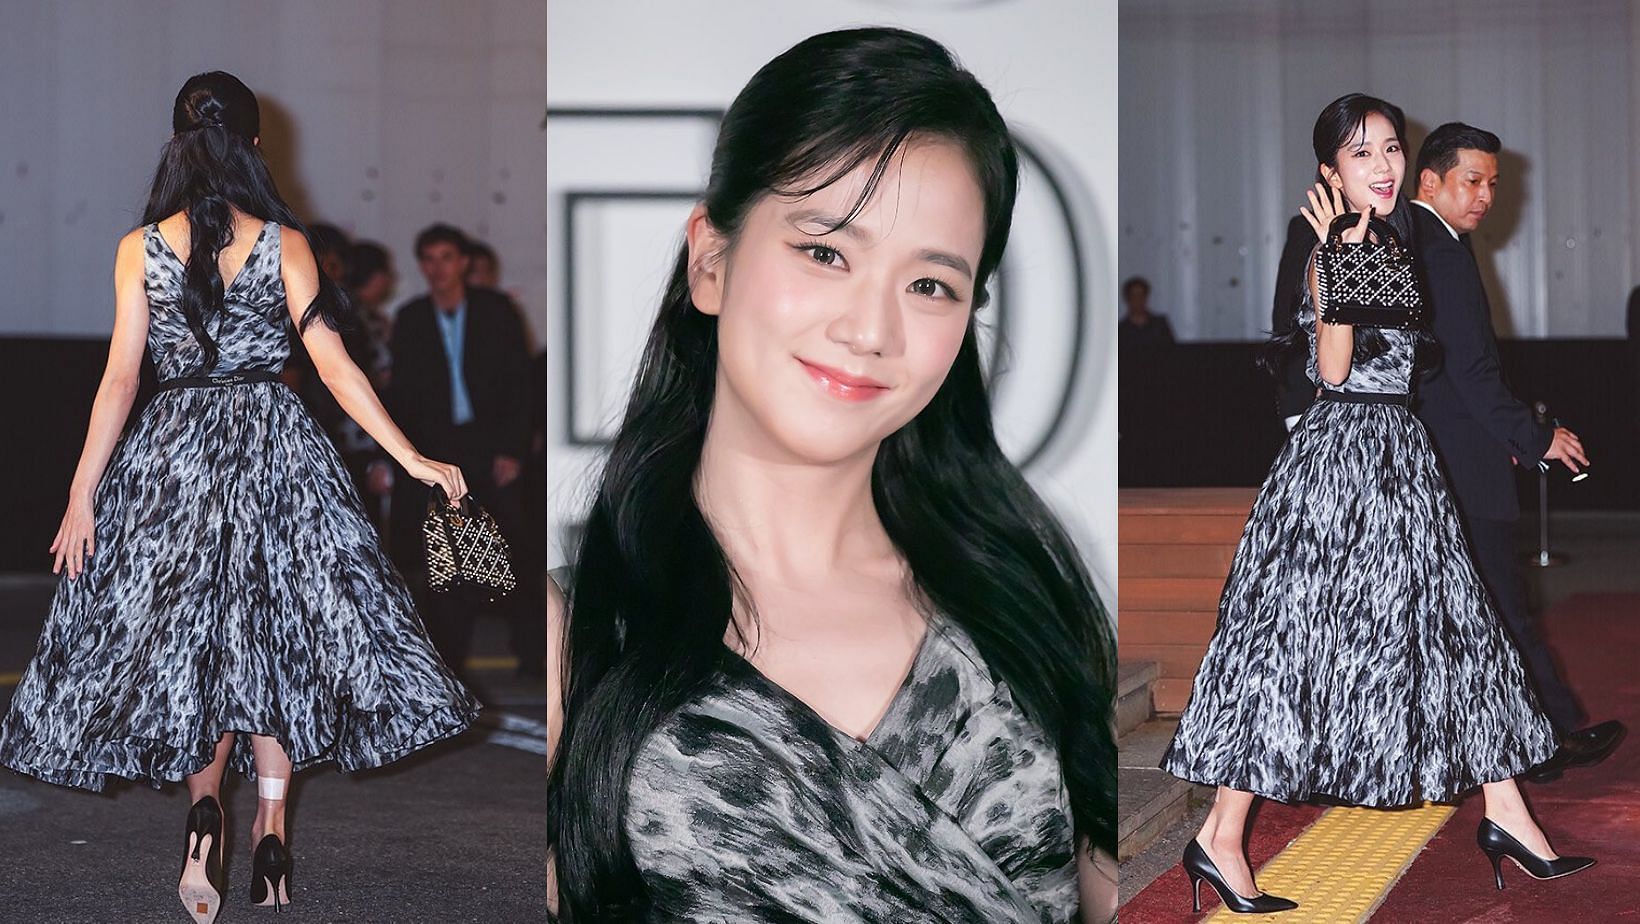 &ldquo;Really a princess&rdquo;: BLACKPINK&rsquo;s Jisoo has fans gushing over her ethereal visuals at Lady Dior exhibition inauguration party (Images via Twitter/@NEWSJISOO  and @AboutMusicYT)